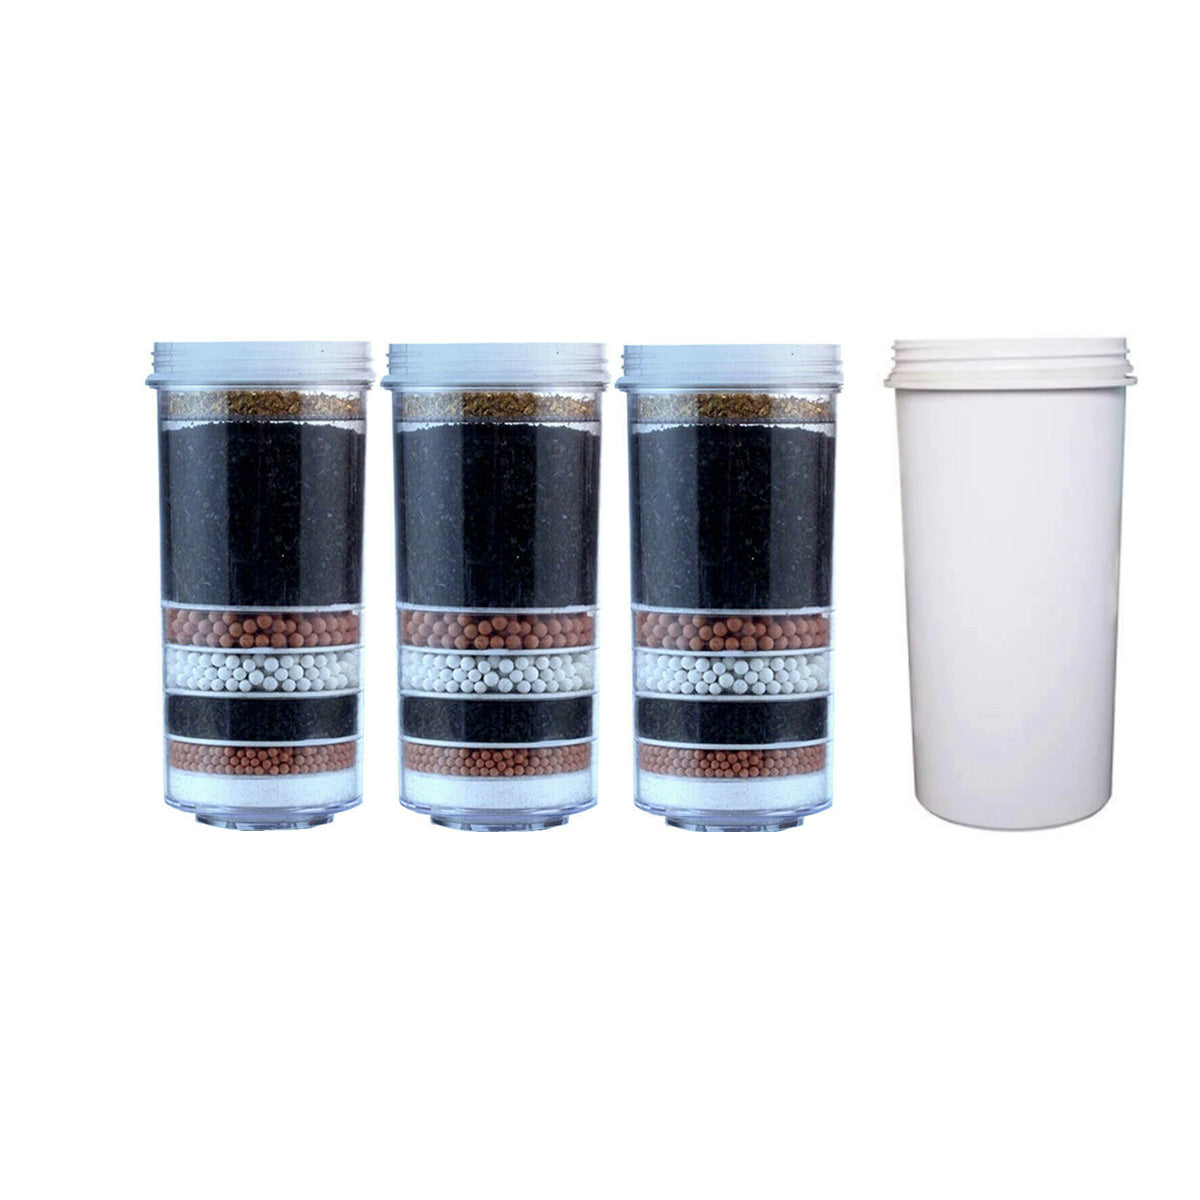 Aimex Water filter free white filter 